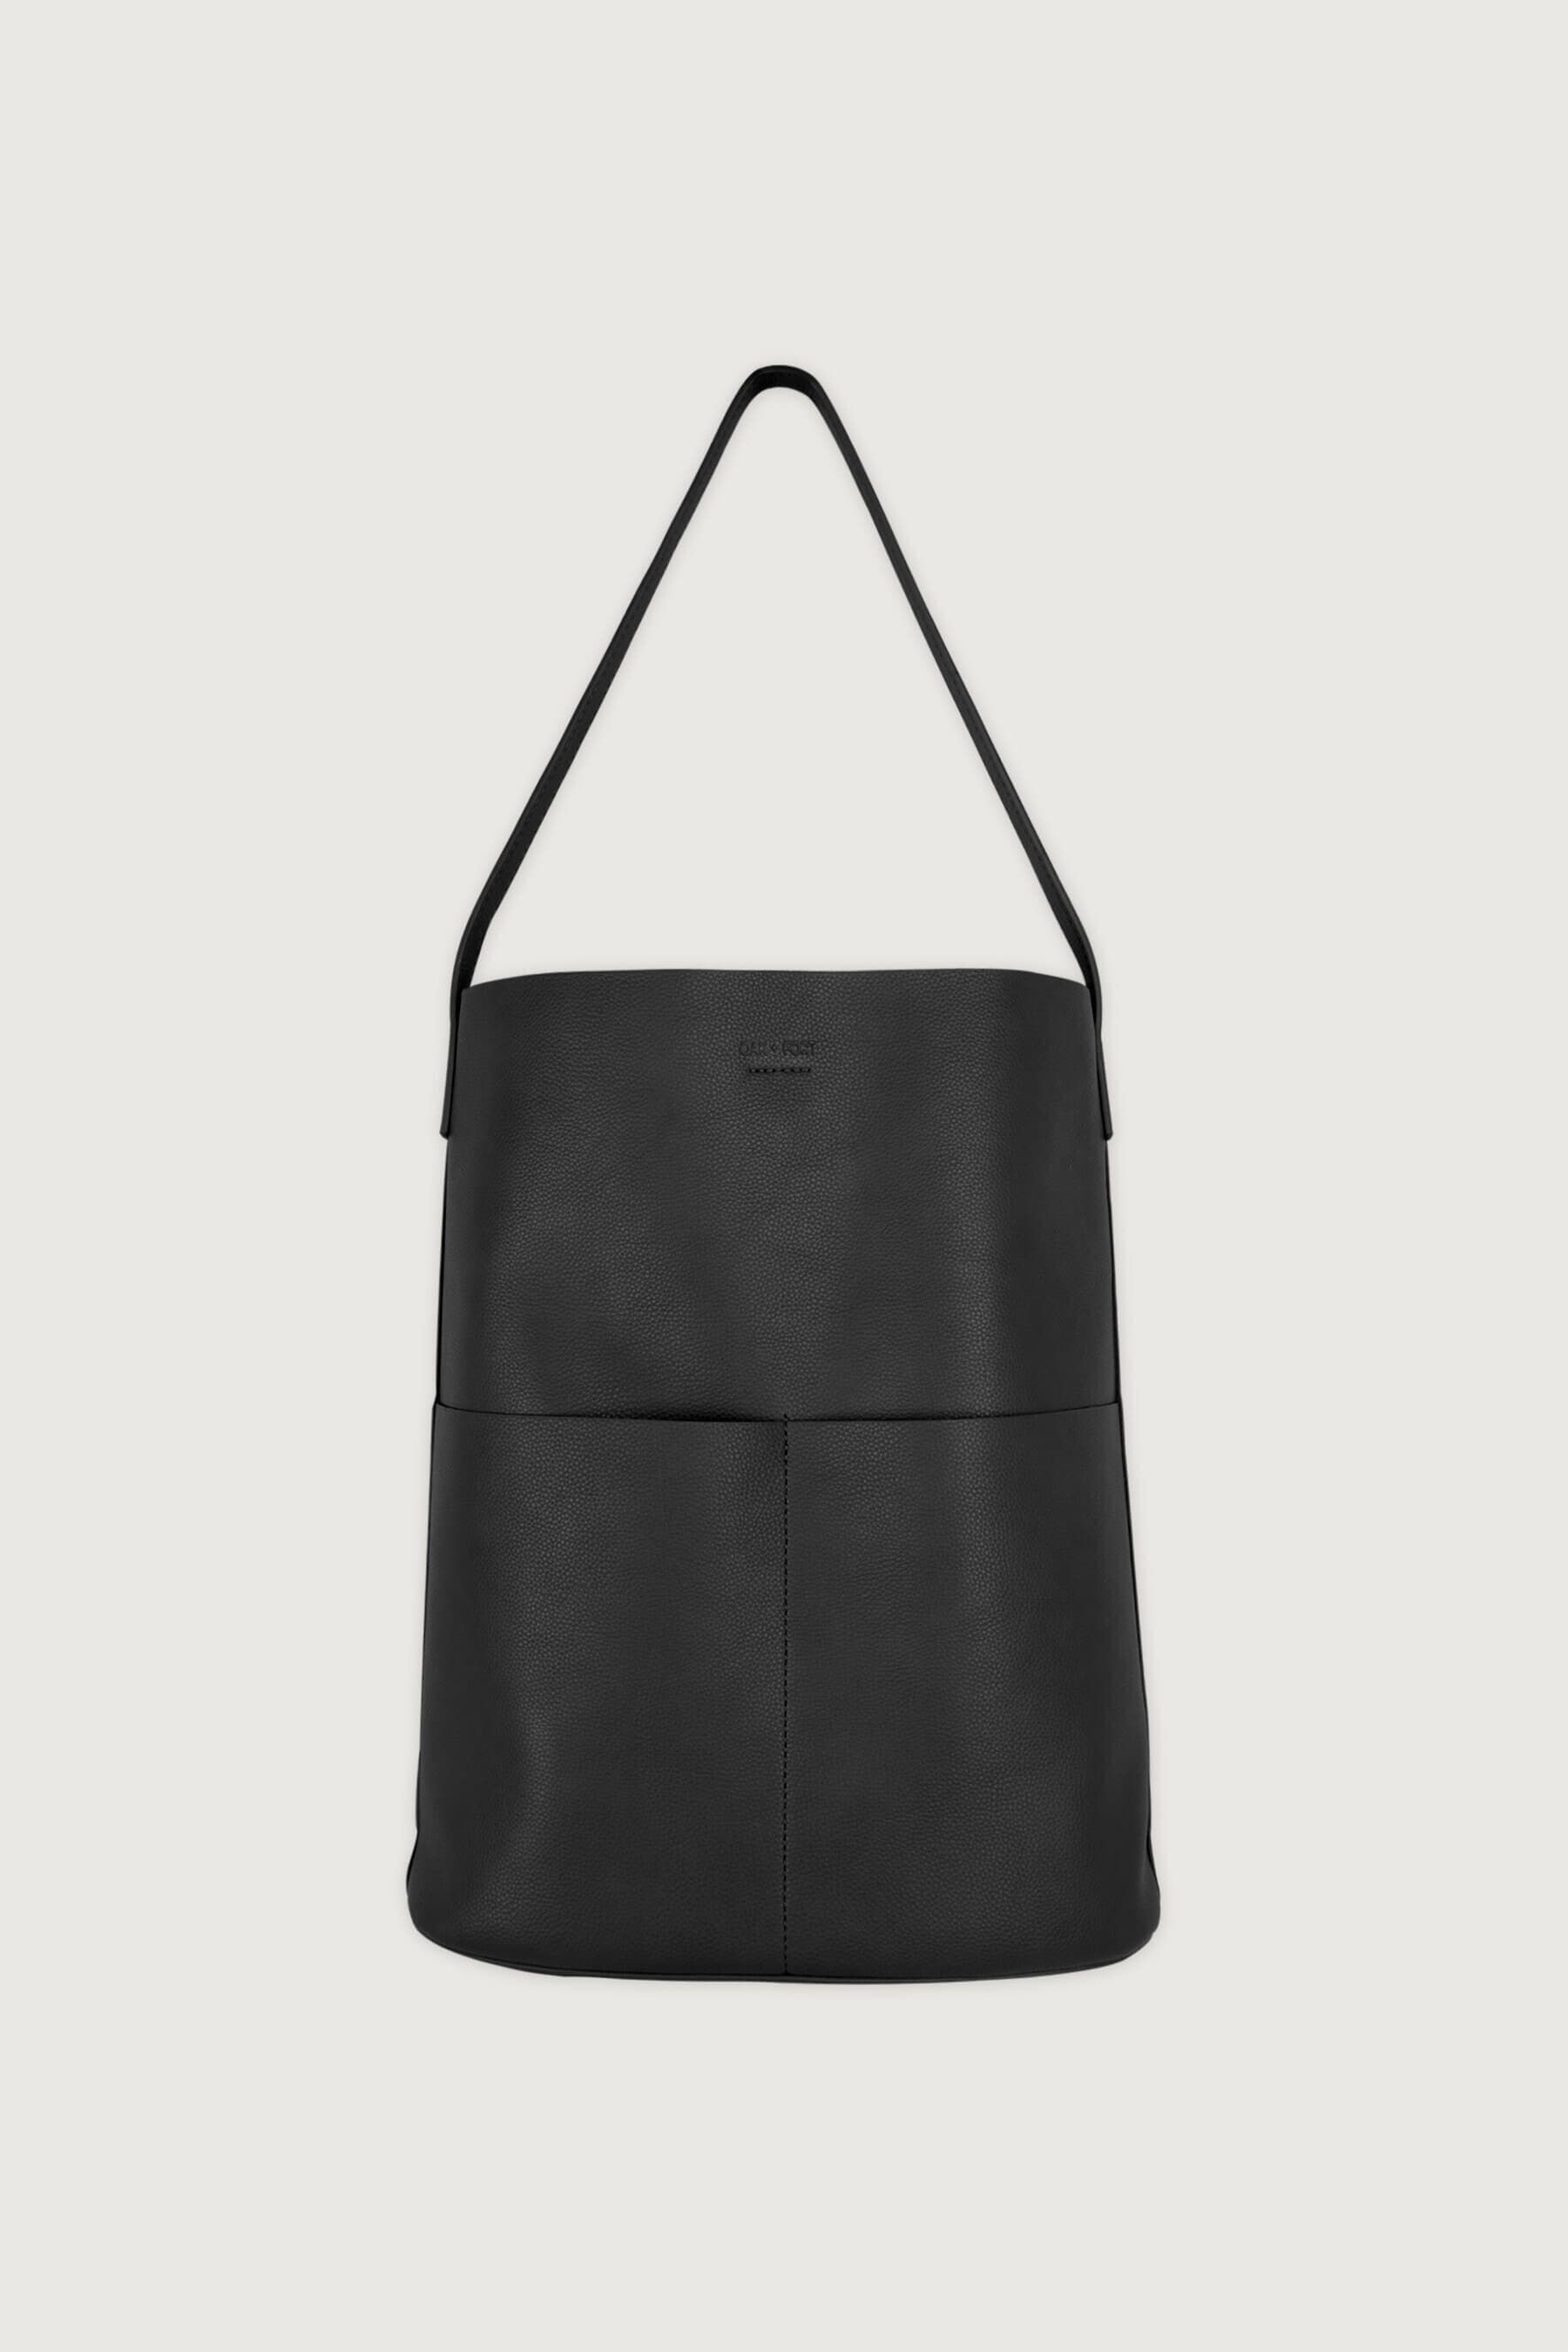 Color : Black It is a Perfect Choice for You Laptop Bag Double Pocket Single Shoulder Bag Black Size: 15.6 Inches